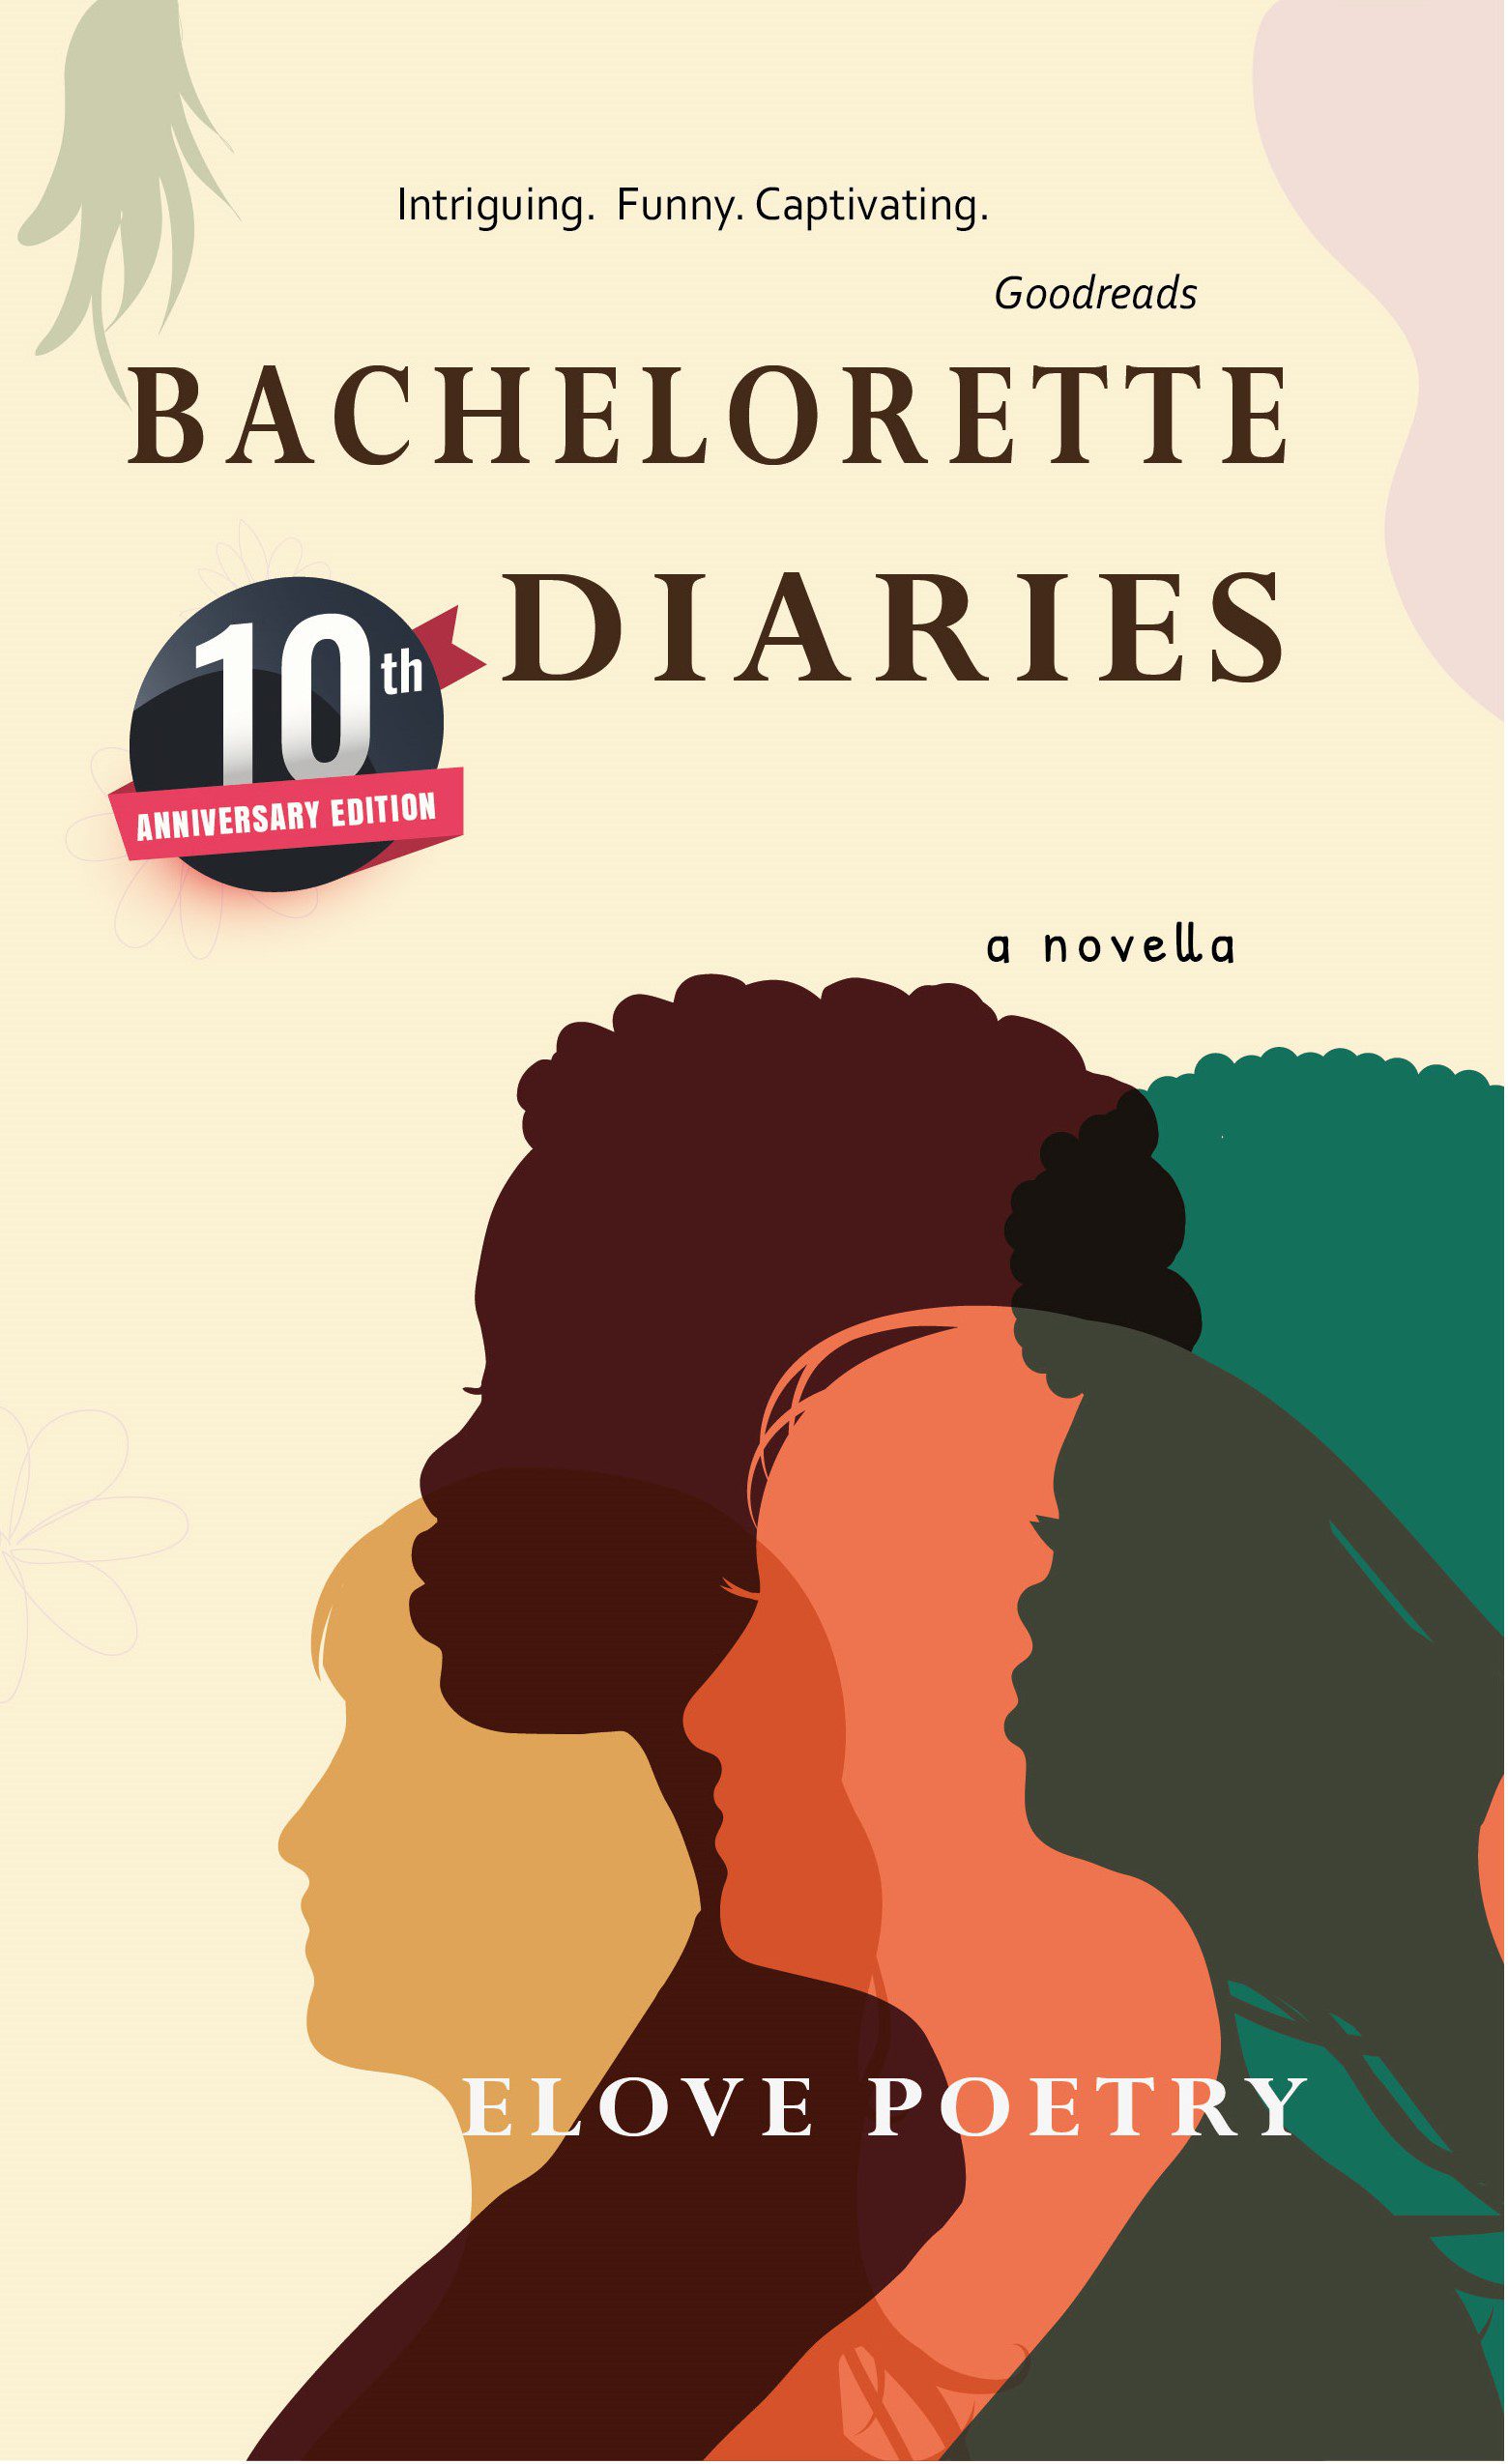 Bachelorette Diaries Cover_FRONT